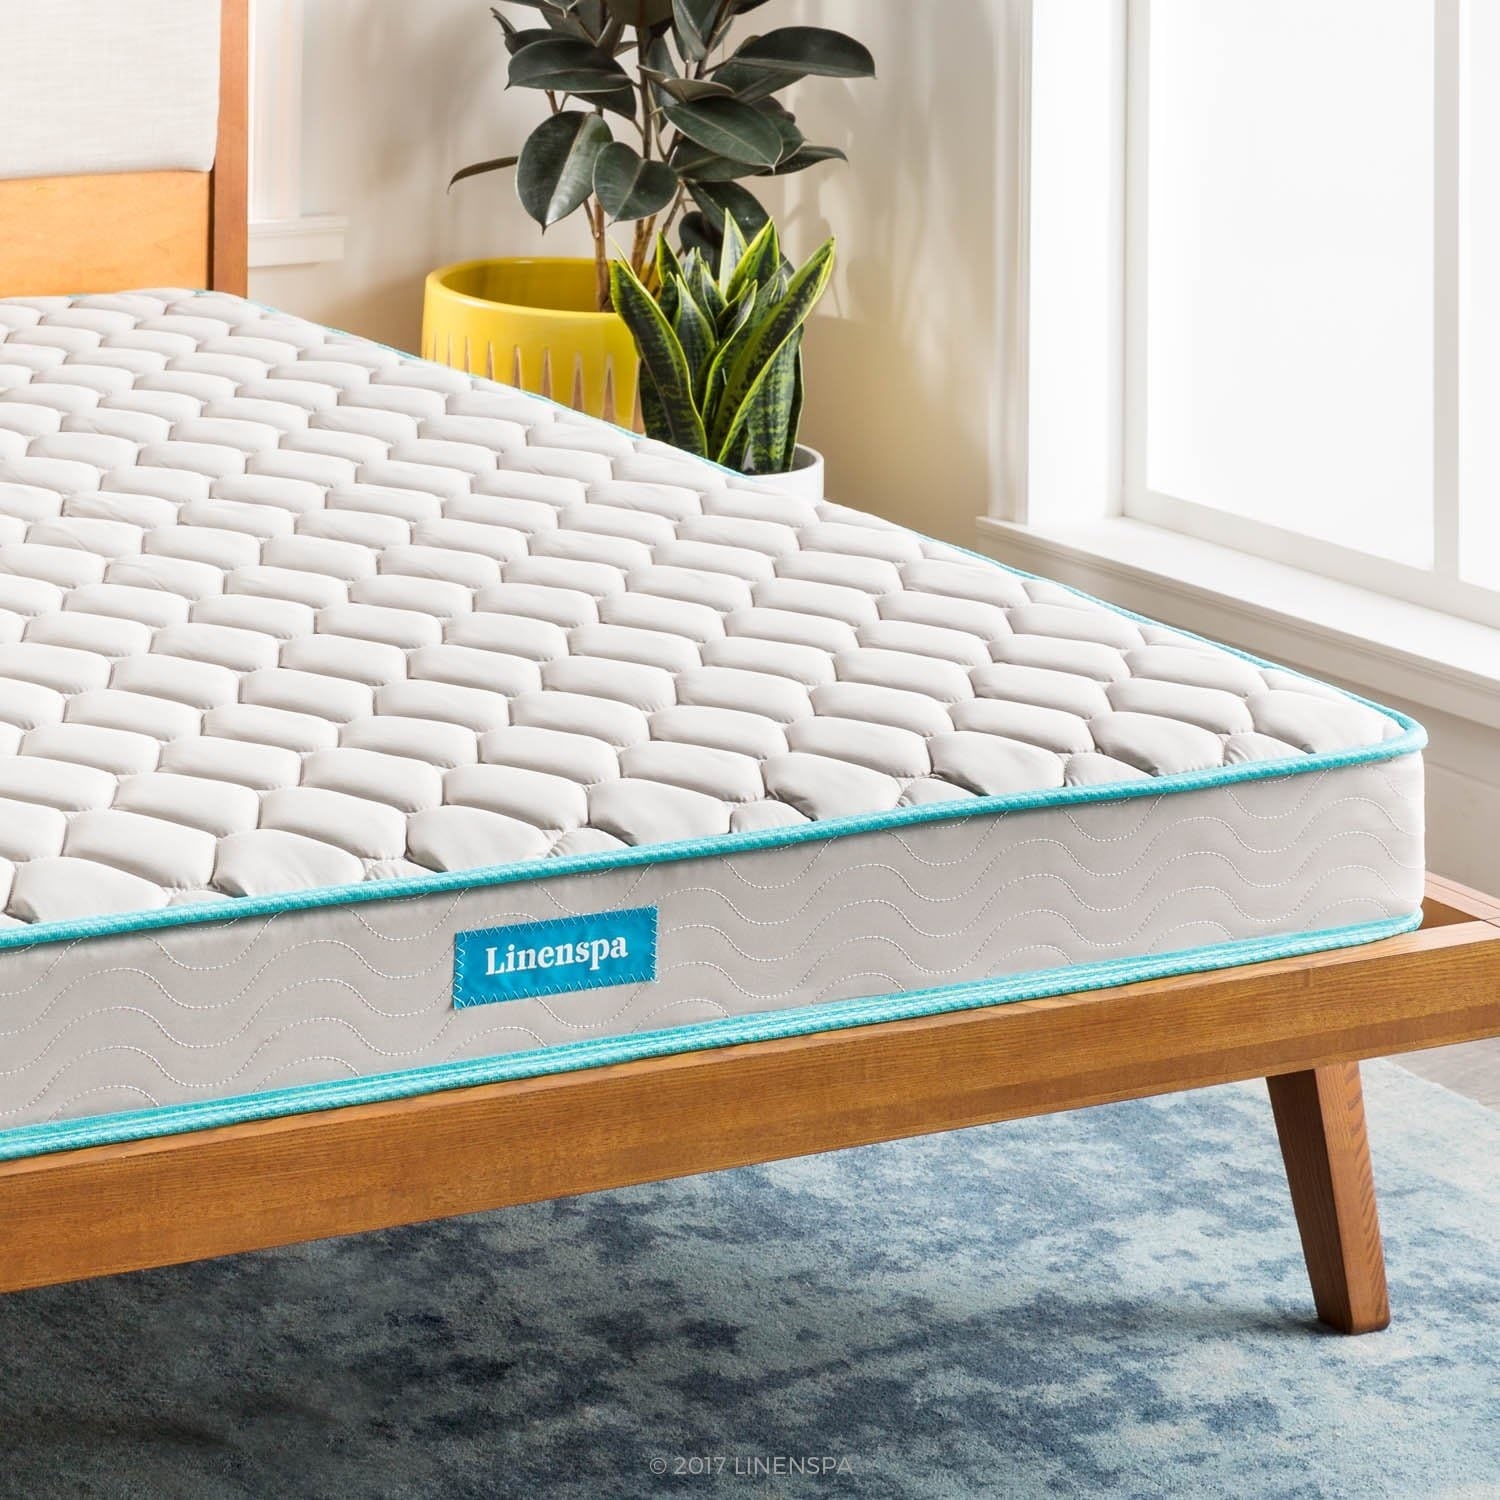 If Your Mattress Has Seen Better Days, Here Are 15 Of The Best Ones You Can Get Right On Amazon